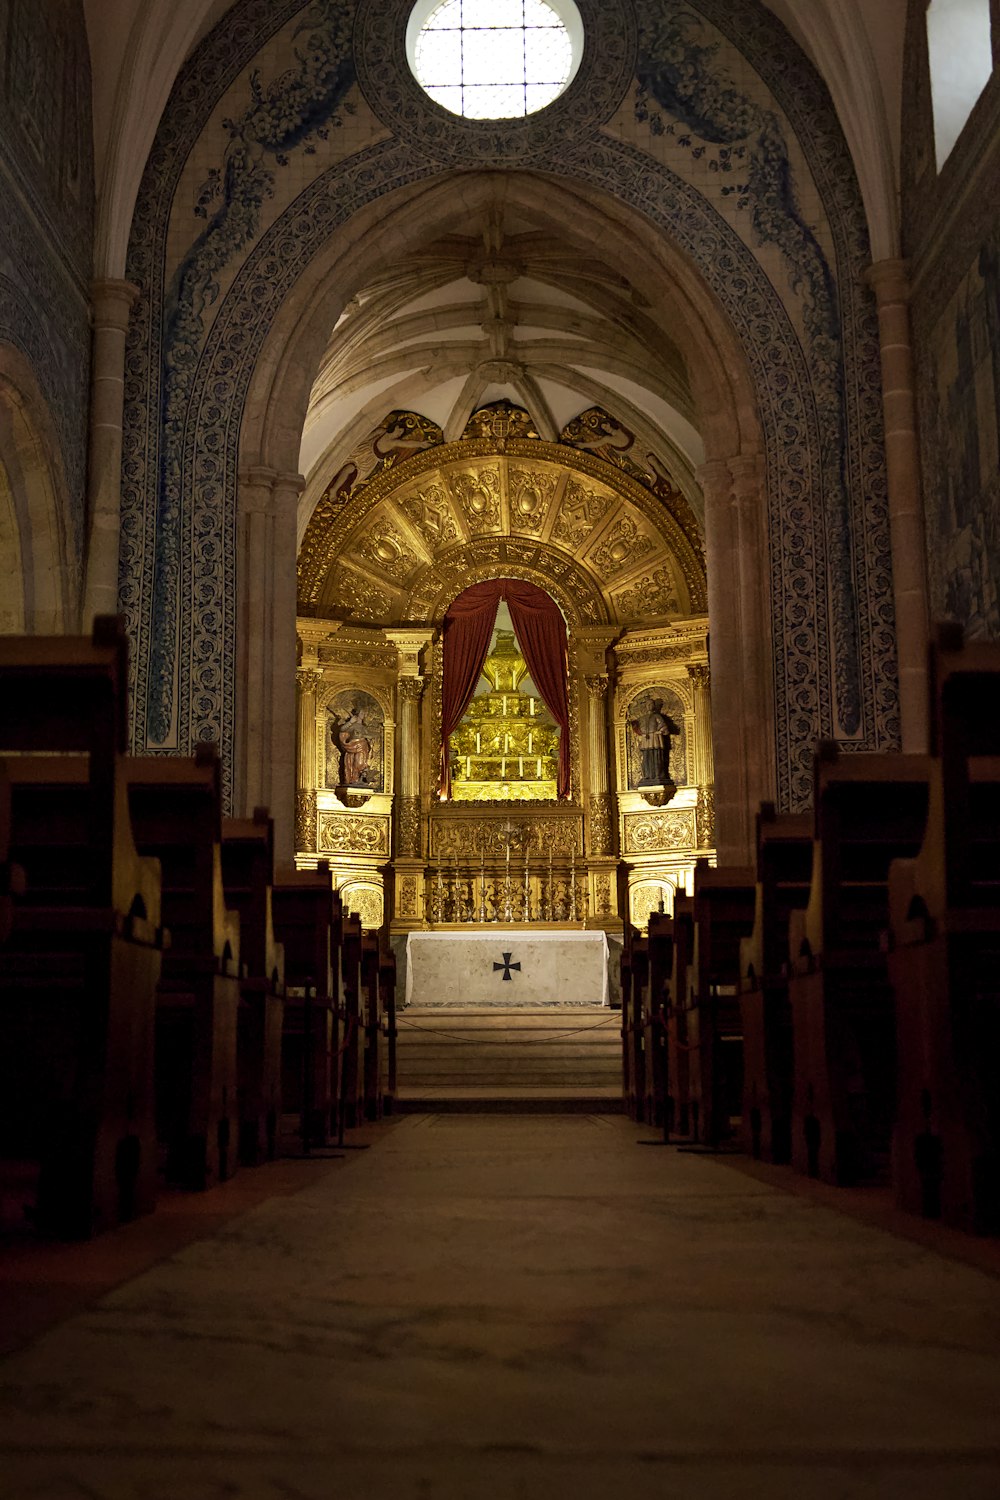 the interior of a church with pews and a gold alter